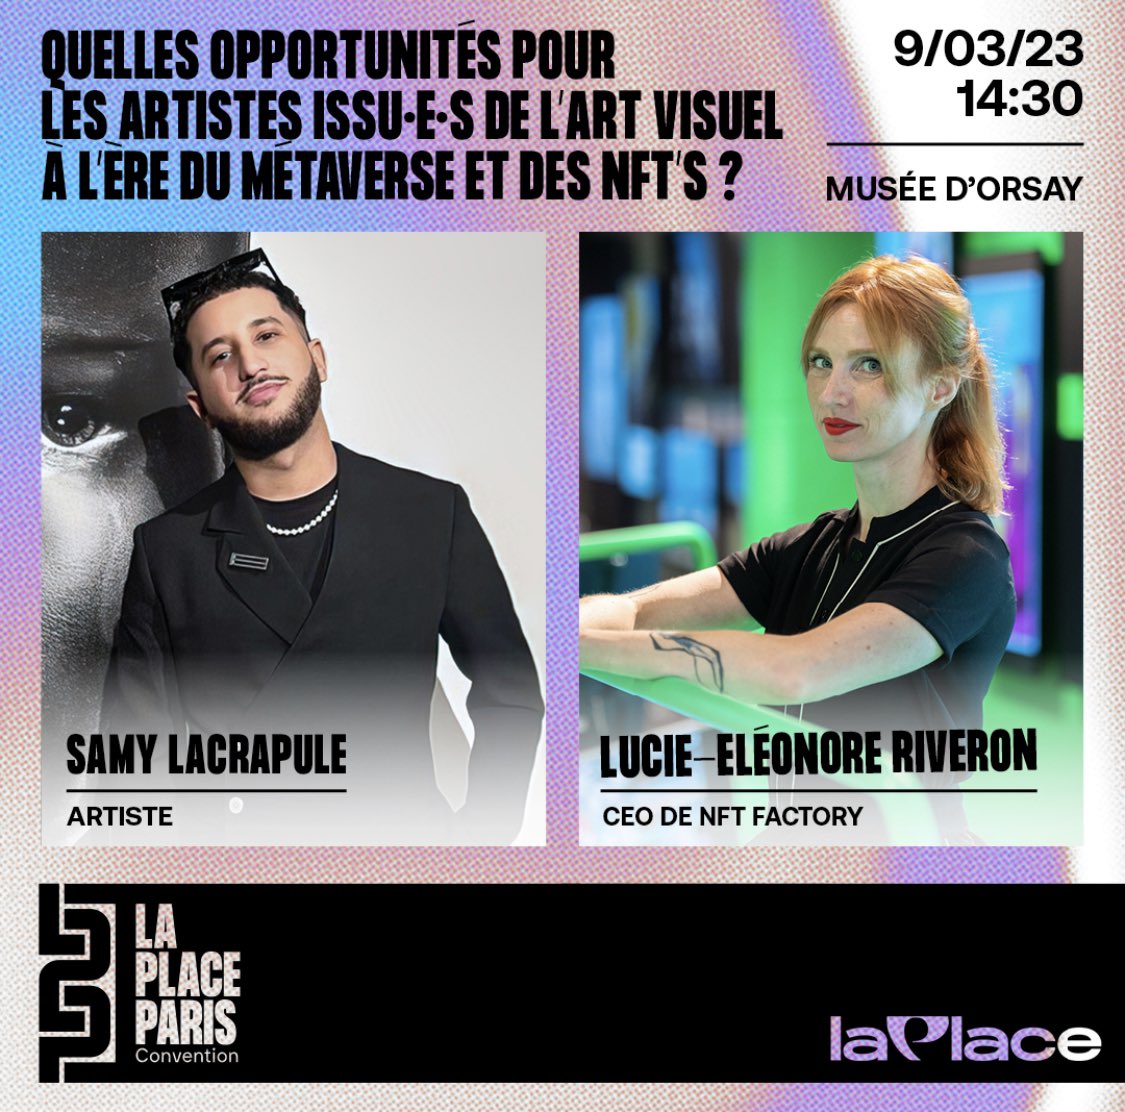 Today at 2.30pm I’ll be with @LaurieBon1 @johnkarp @agoriamusic and @samylacrapule to talk about new opportunities NFT are bringing for artists at @MuseeOrsay ⚡️⚡️